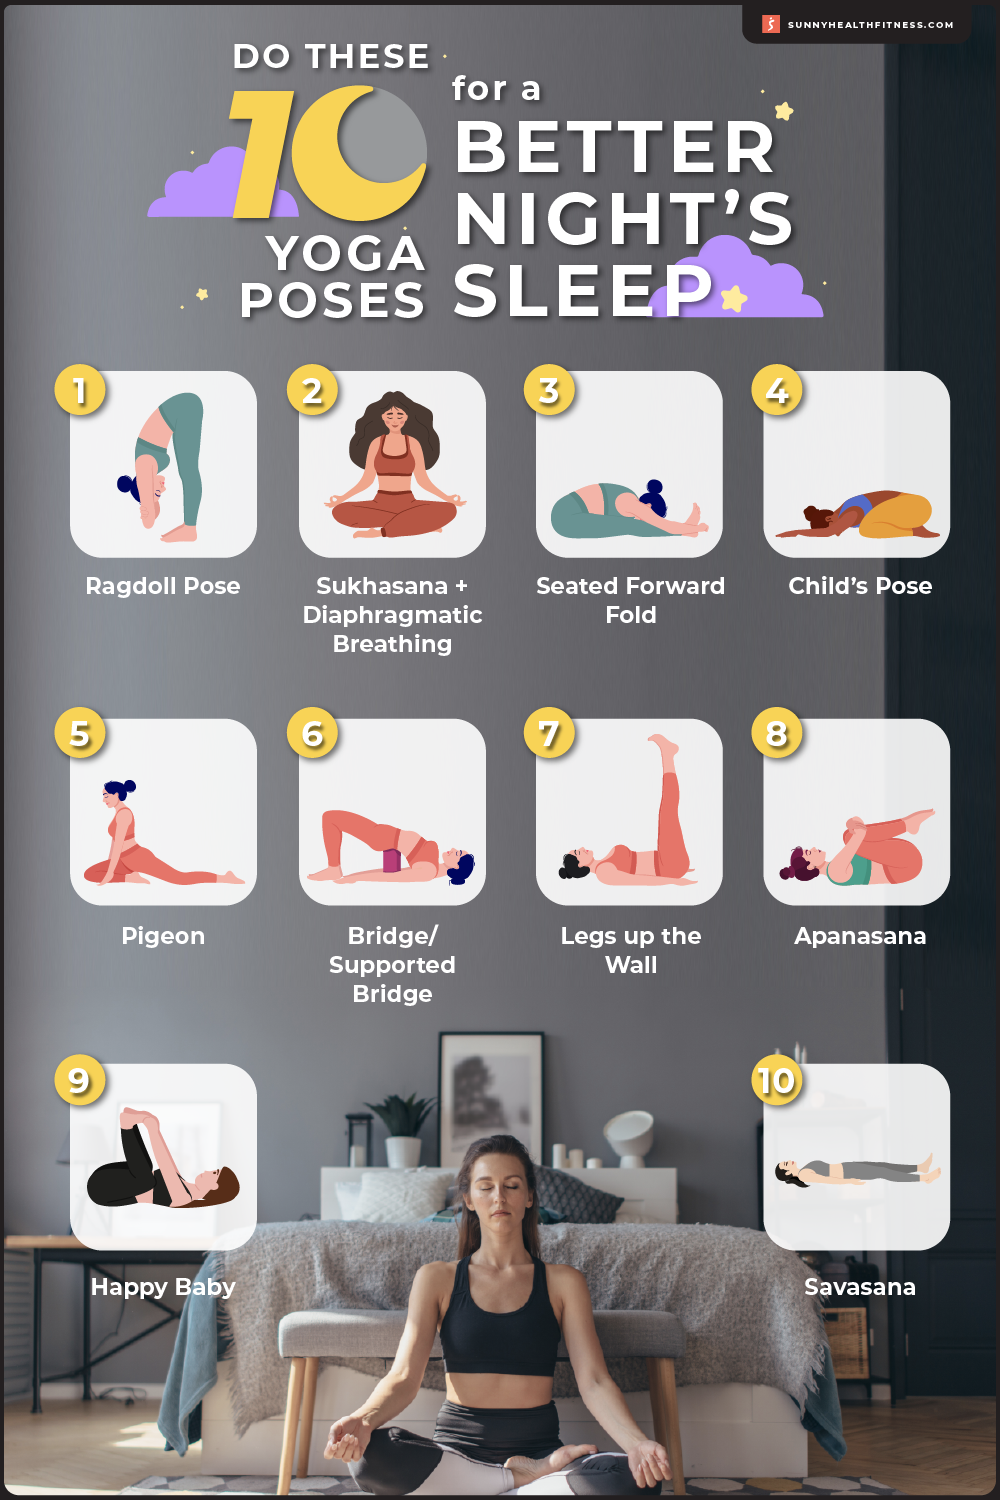 10 Yoga Poses Before Bed for a Better Night’s Sleep Infographic